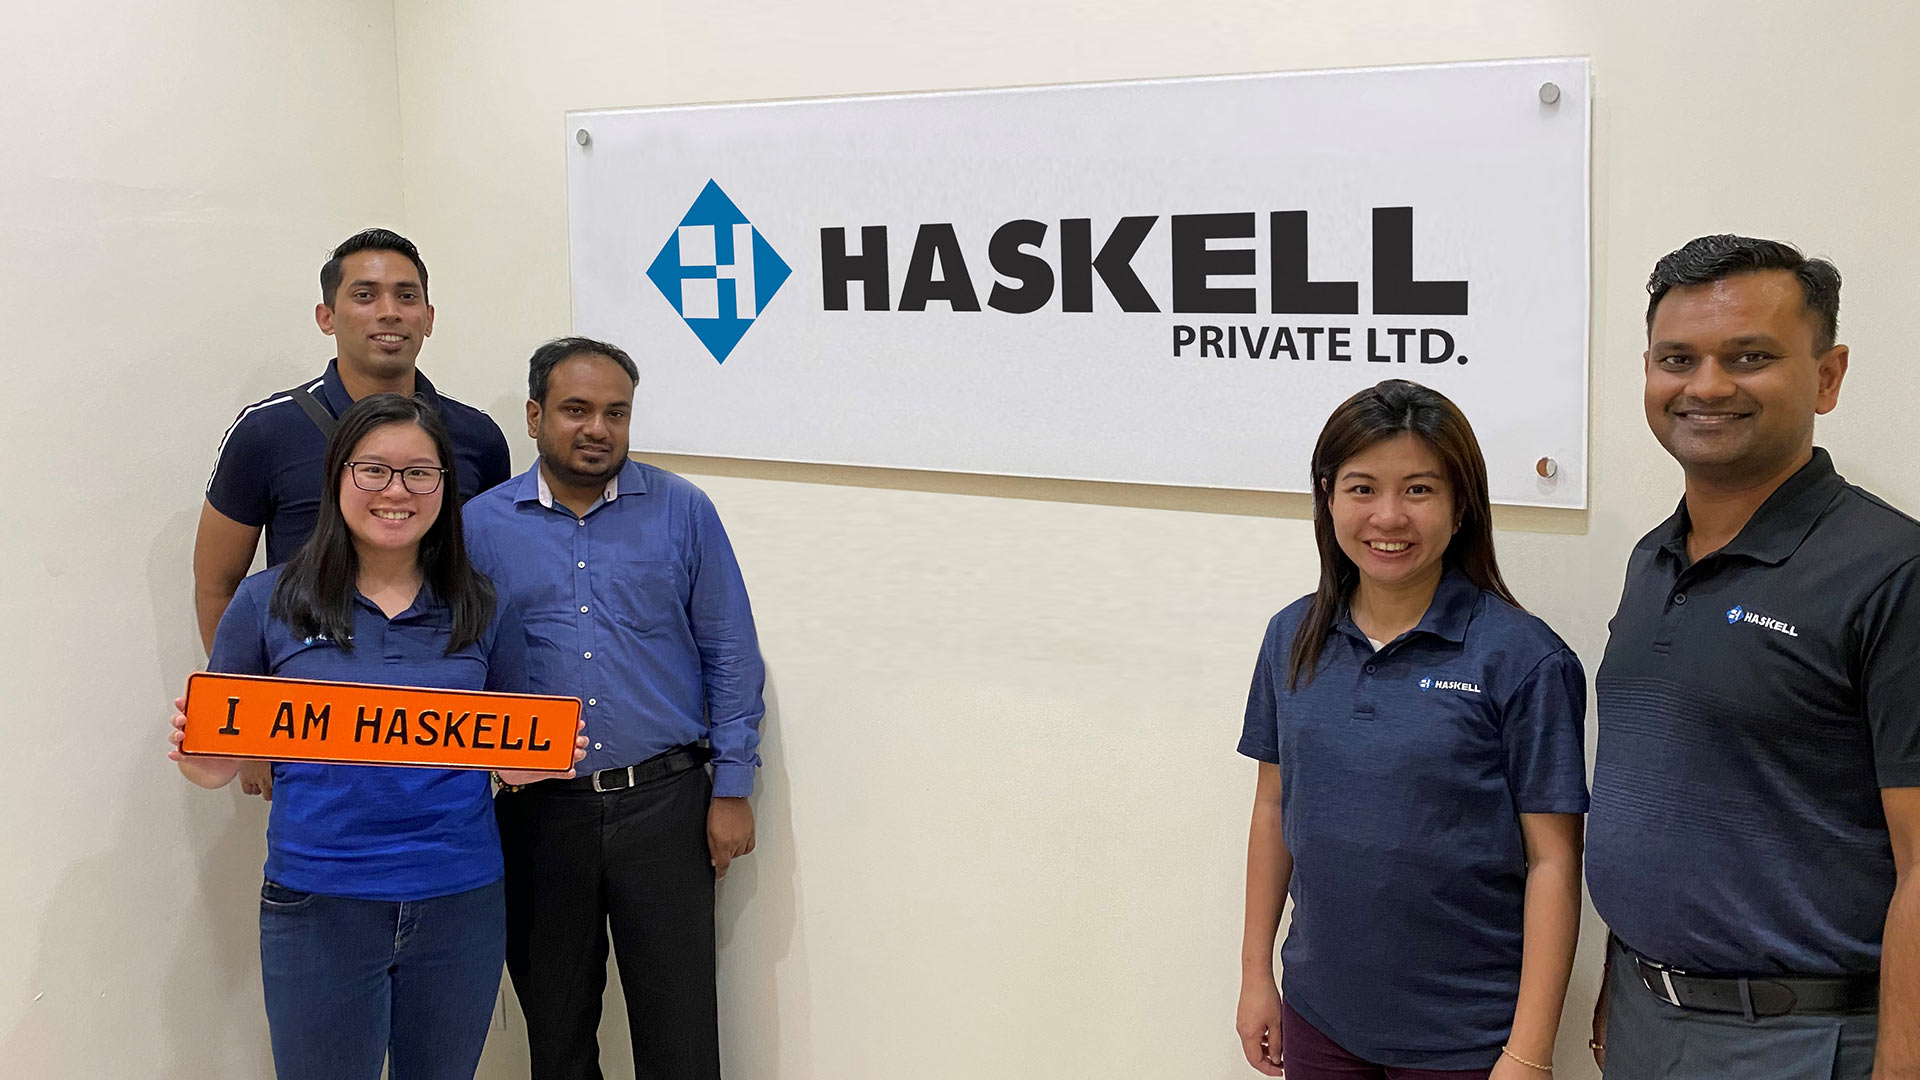 Singapore Architecture, Engineering & Construction Company Haskell